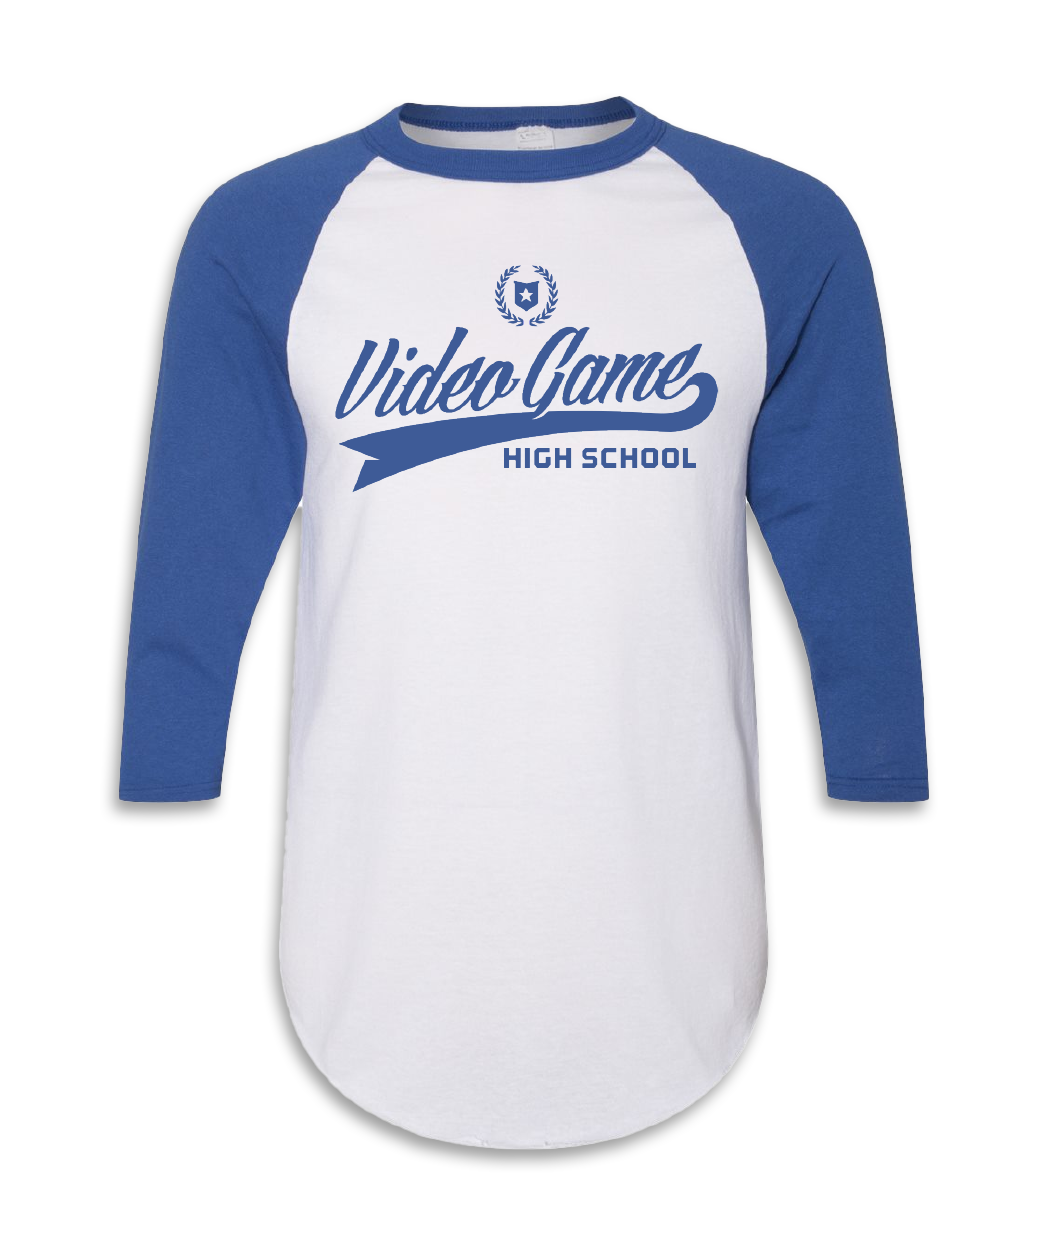 White baseball tee with royal blue sleeves and the text 